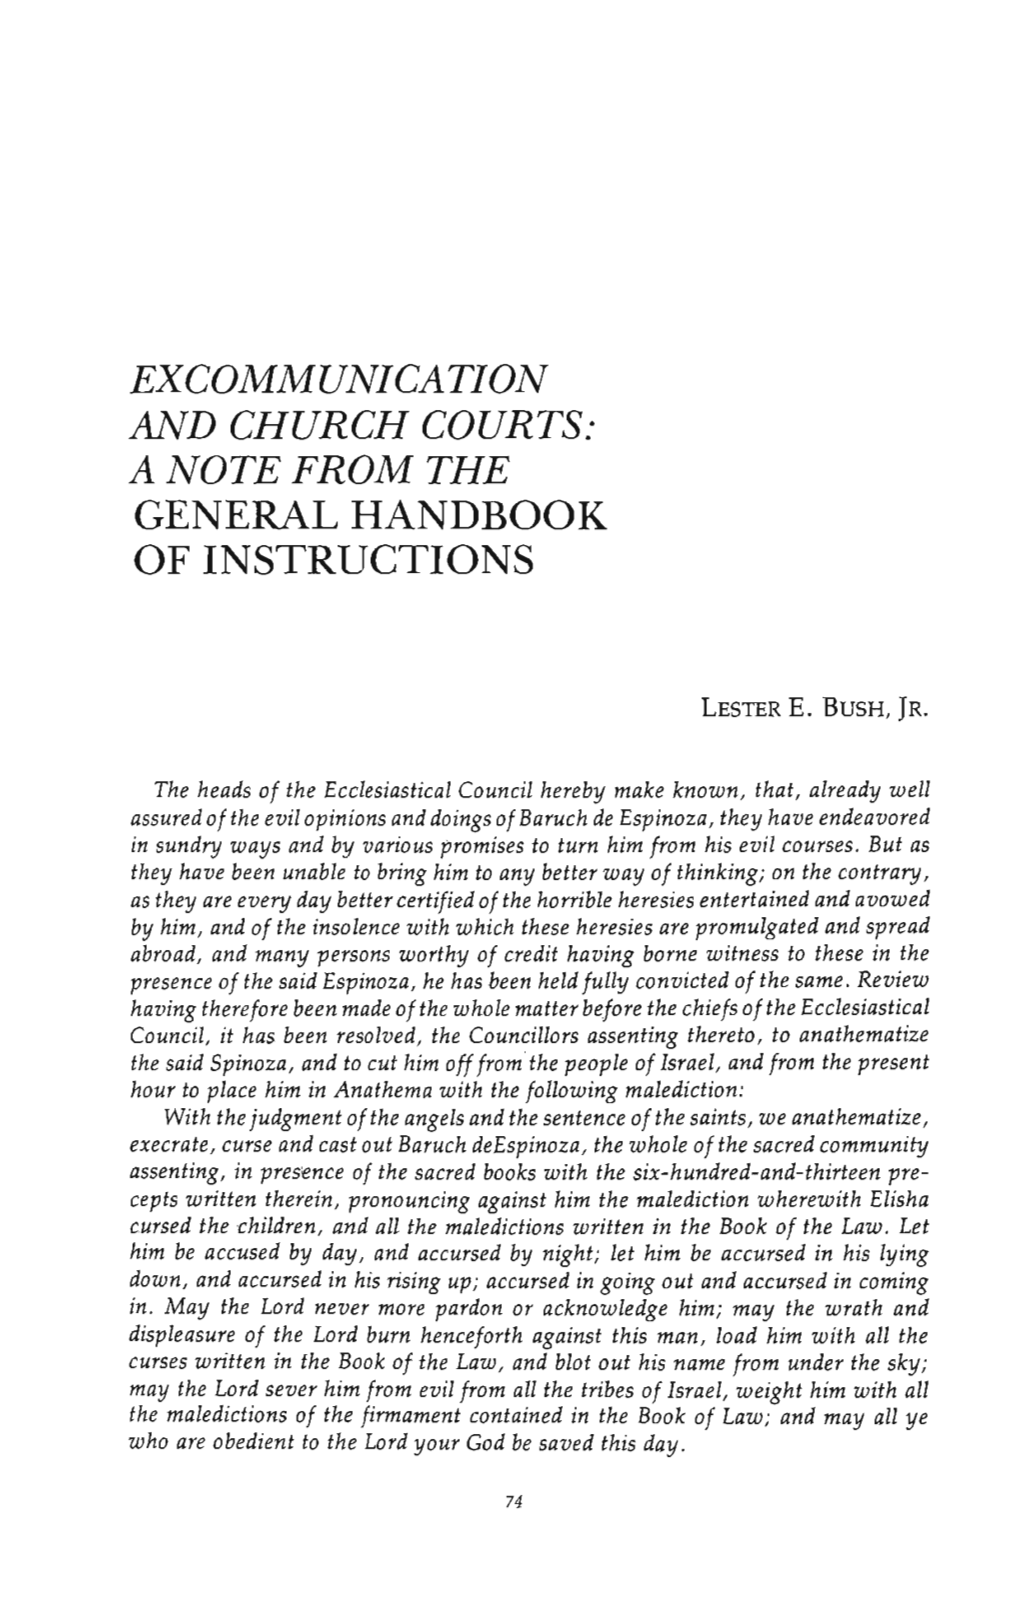 Excommunication and Church Courts: a Note from the General Handbook of Instructions